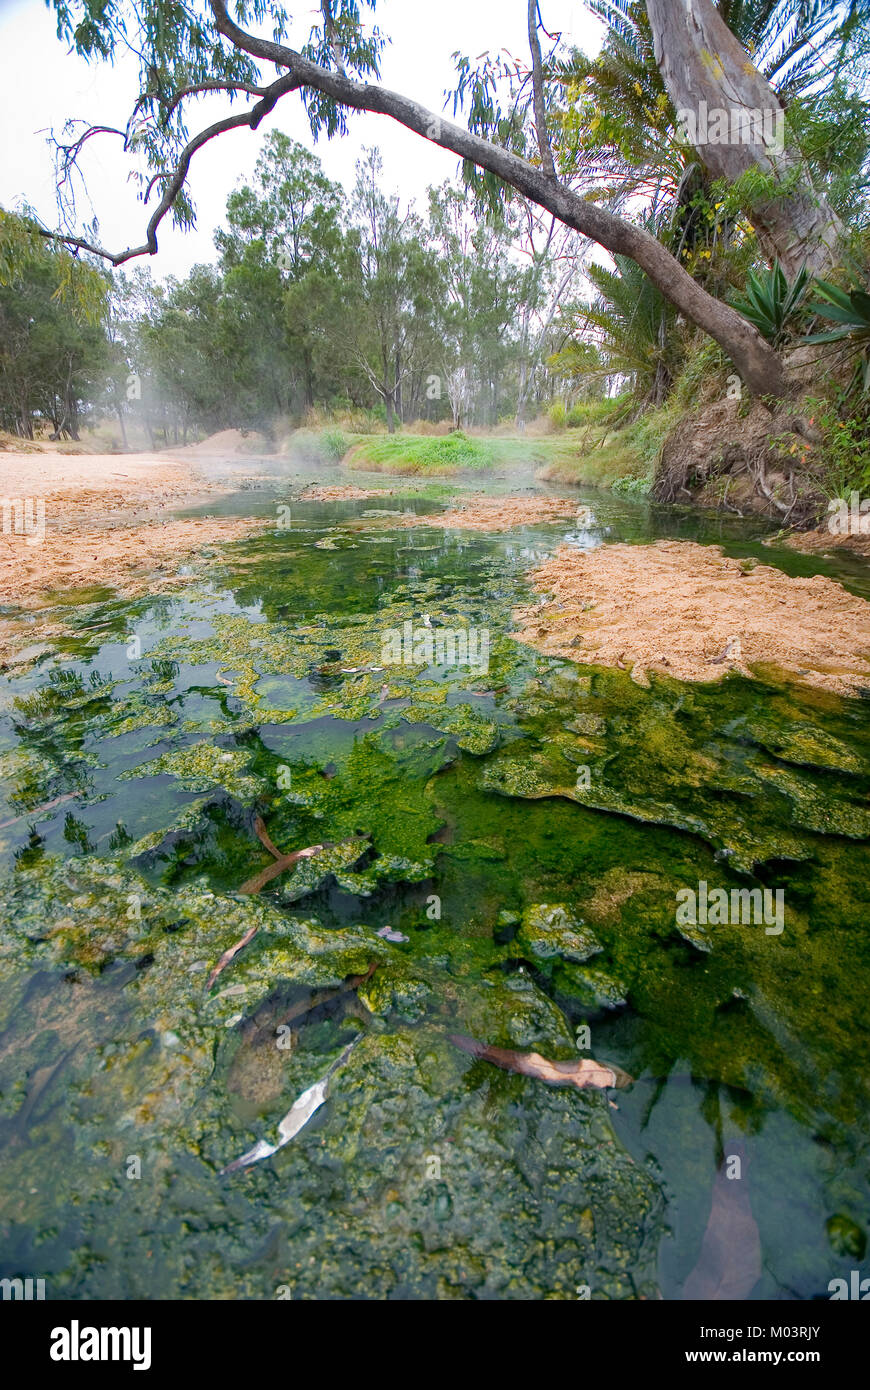 Australia, Queensland, Innot Hot Springs. Hot water provides ideals conditions for algae growth in Nettle Creek on the Savannah Way Stock Photo